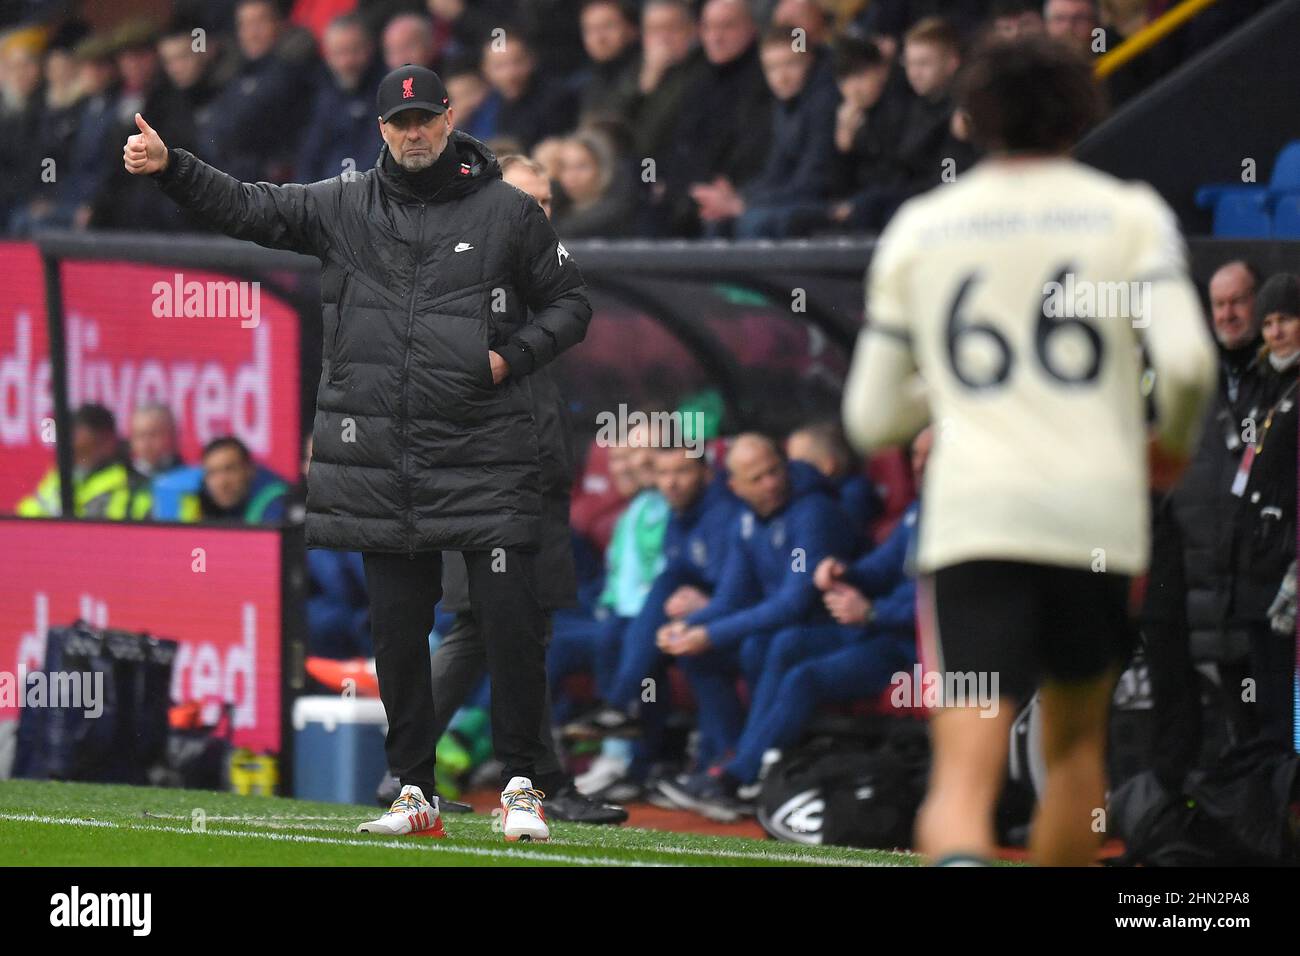 Burnley, UK. 13th Feb, 2022. Liverpool manager Jurgen Klopp gestures towards Liverpool's Trent Alexander-Arnold during the Premier League match at Turf Moor, Burnley, UK. Picture date: Sunday February 13, 2022. Photo credit should read: Anthony Devlin Credit: Anthony Devlin/Alamy Live News Stock Photo